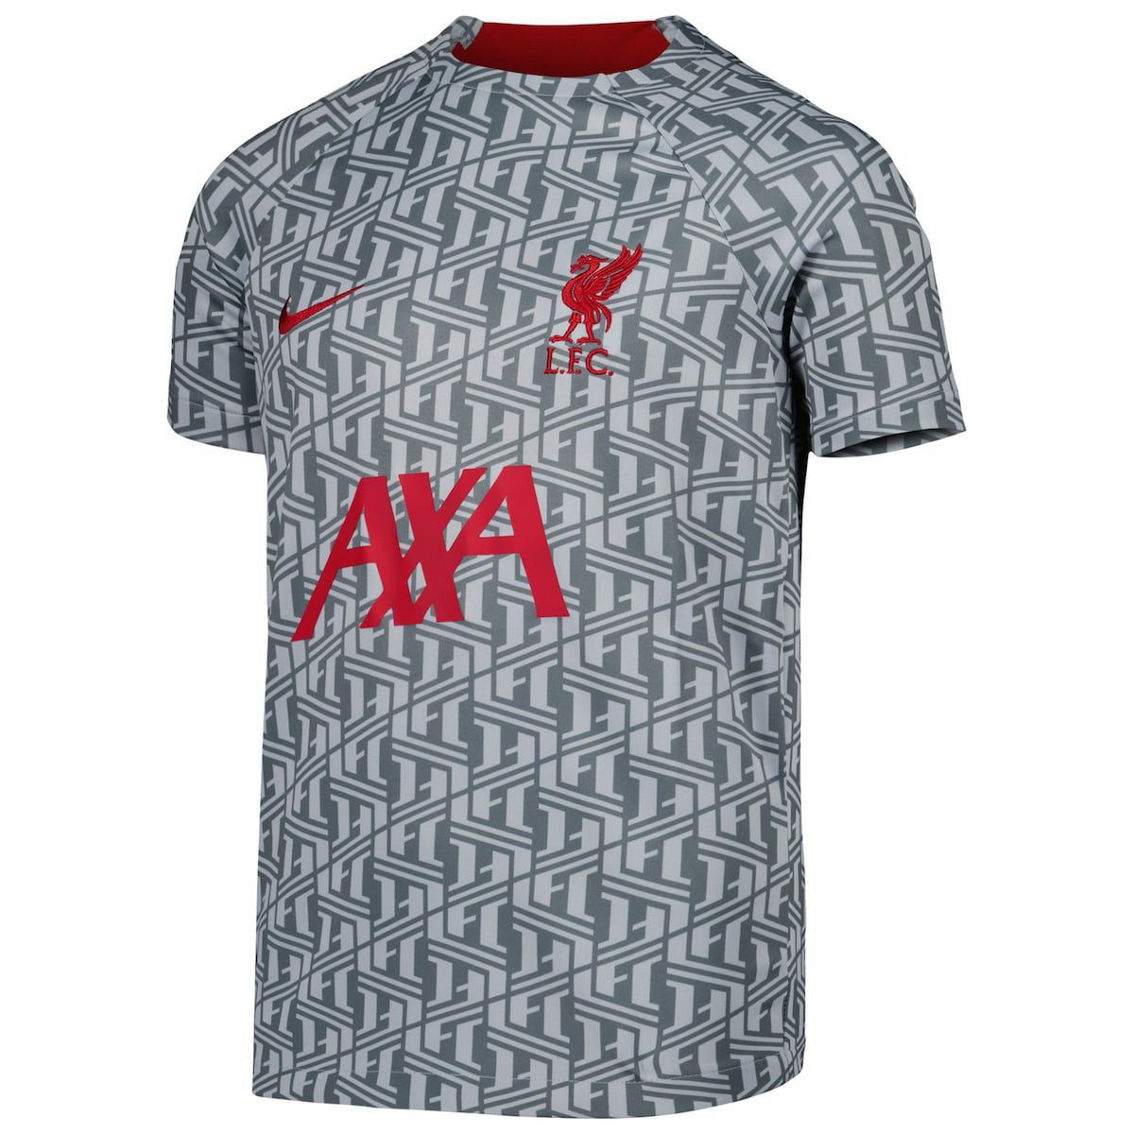 Nike Youth Gray Liverpool Pre-Match Top - Image 3 of 4